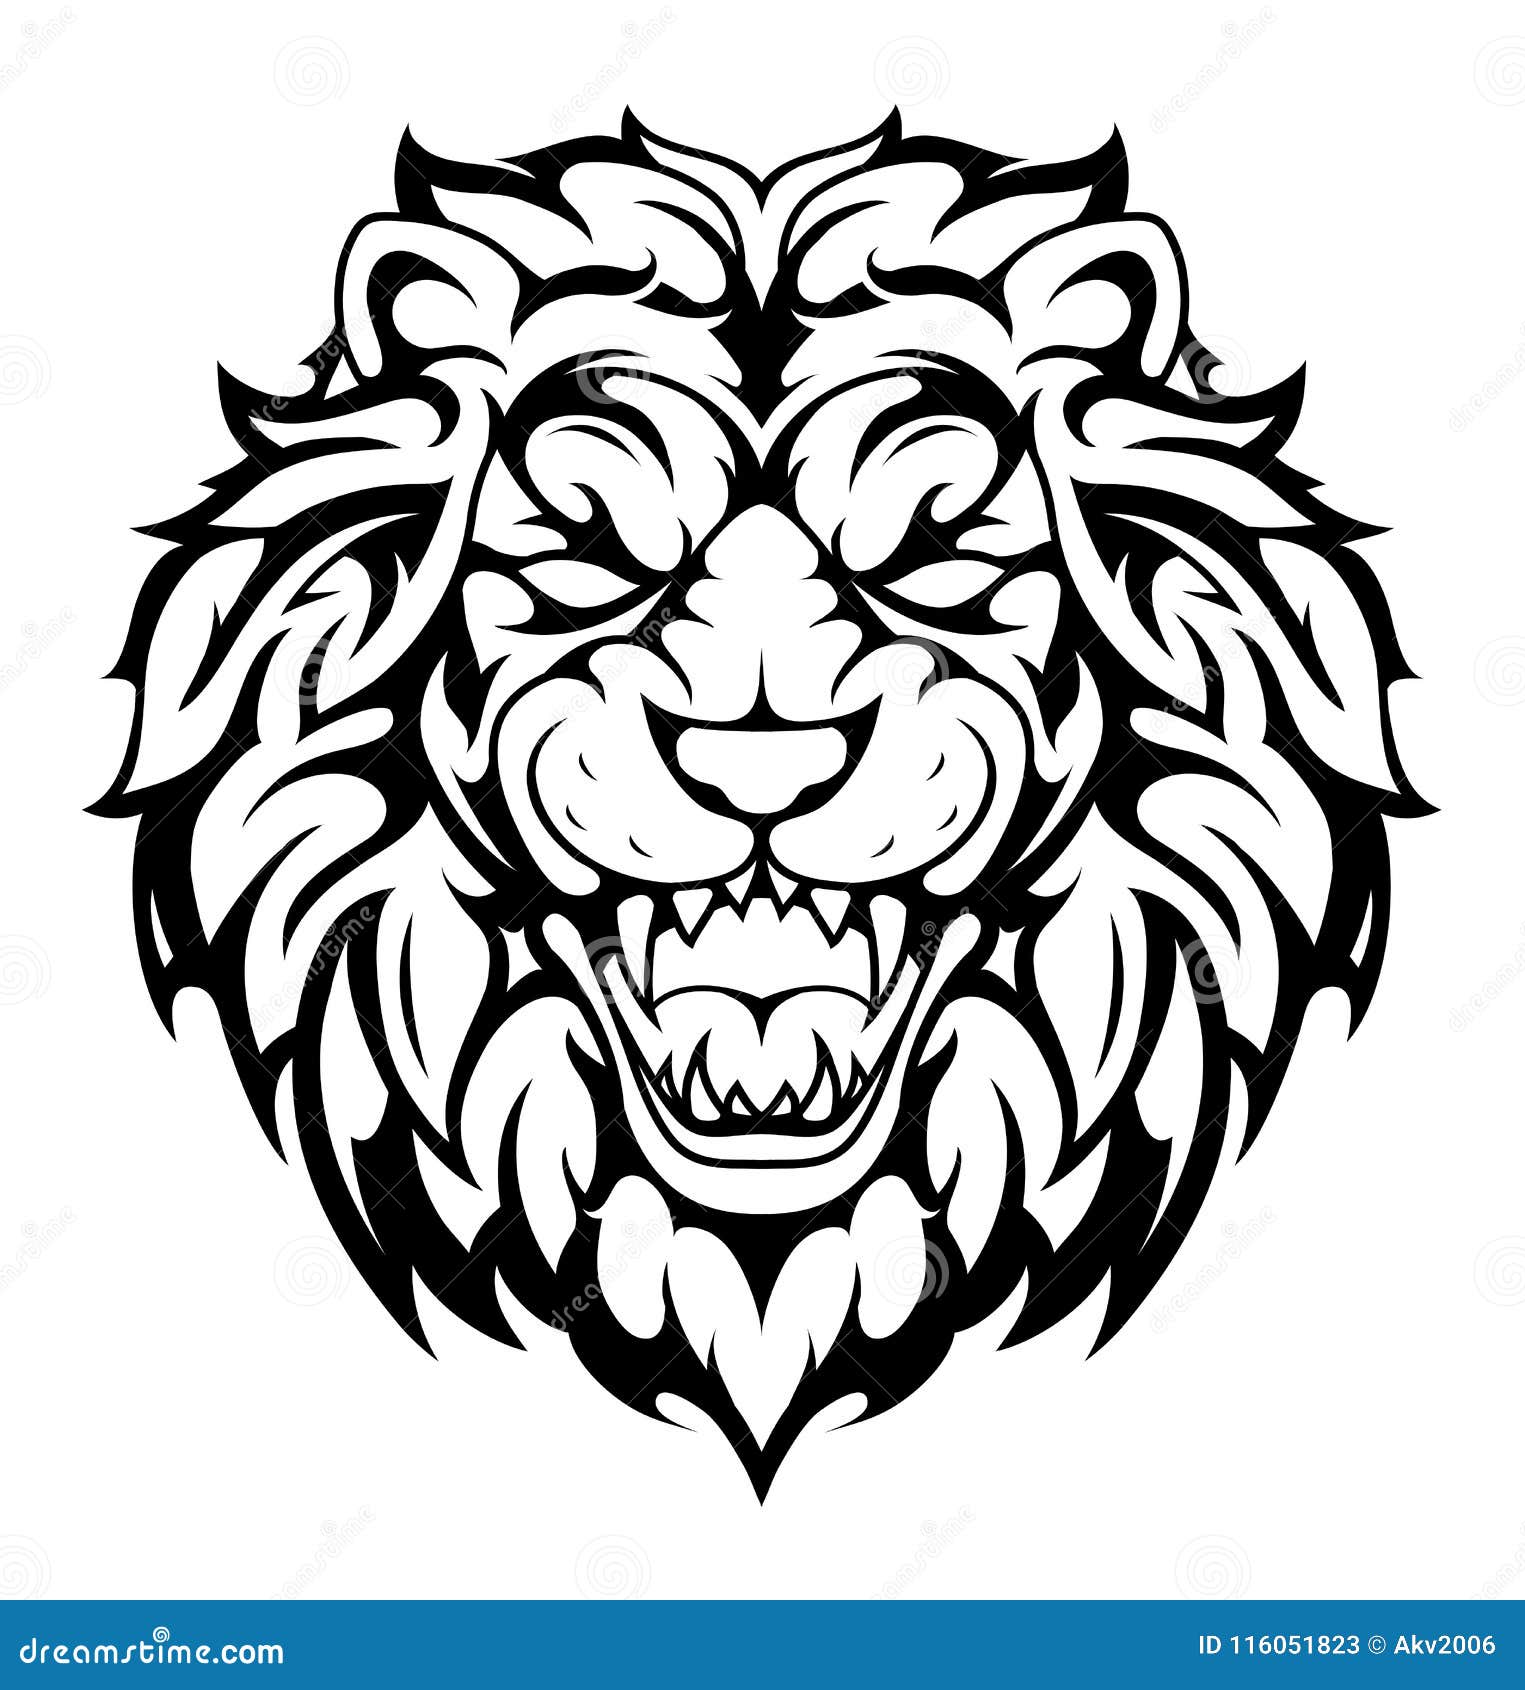 Lion Tribal Tattoo Transparent PNG - 500x500 - Free Download on NicePNG